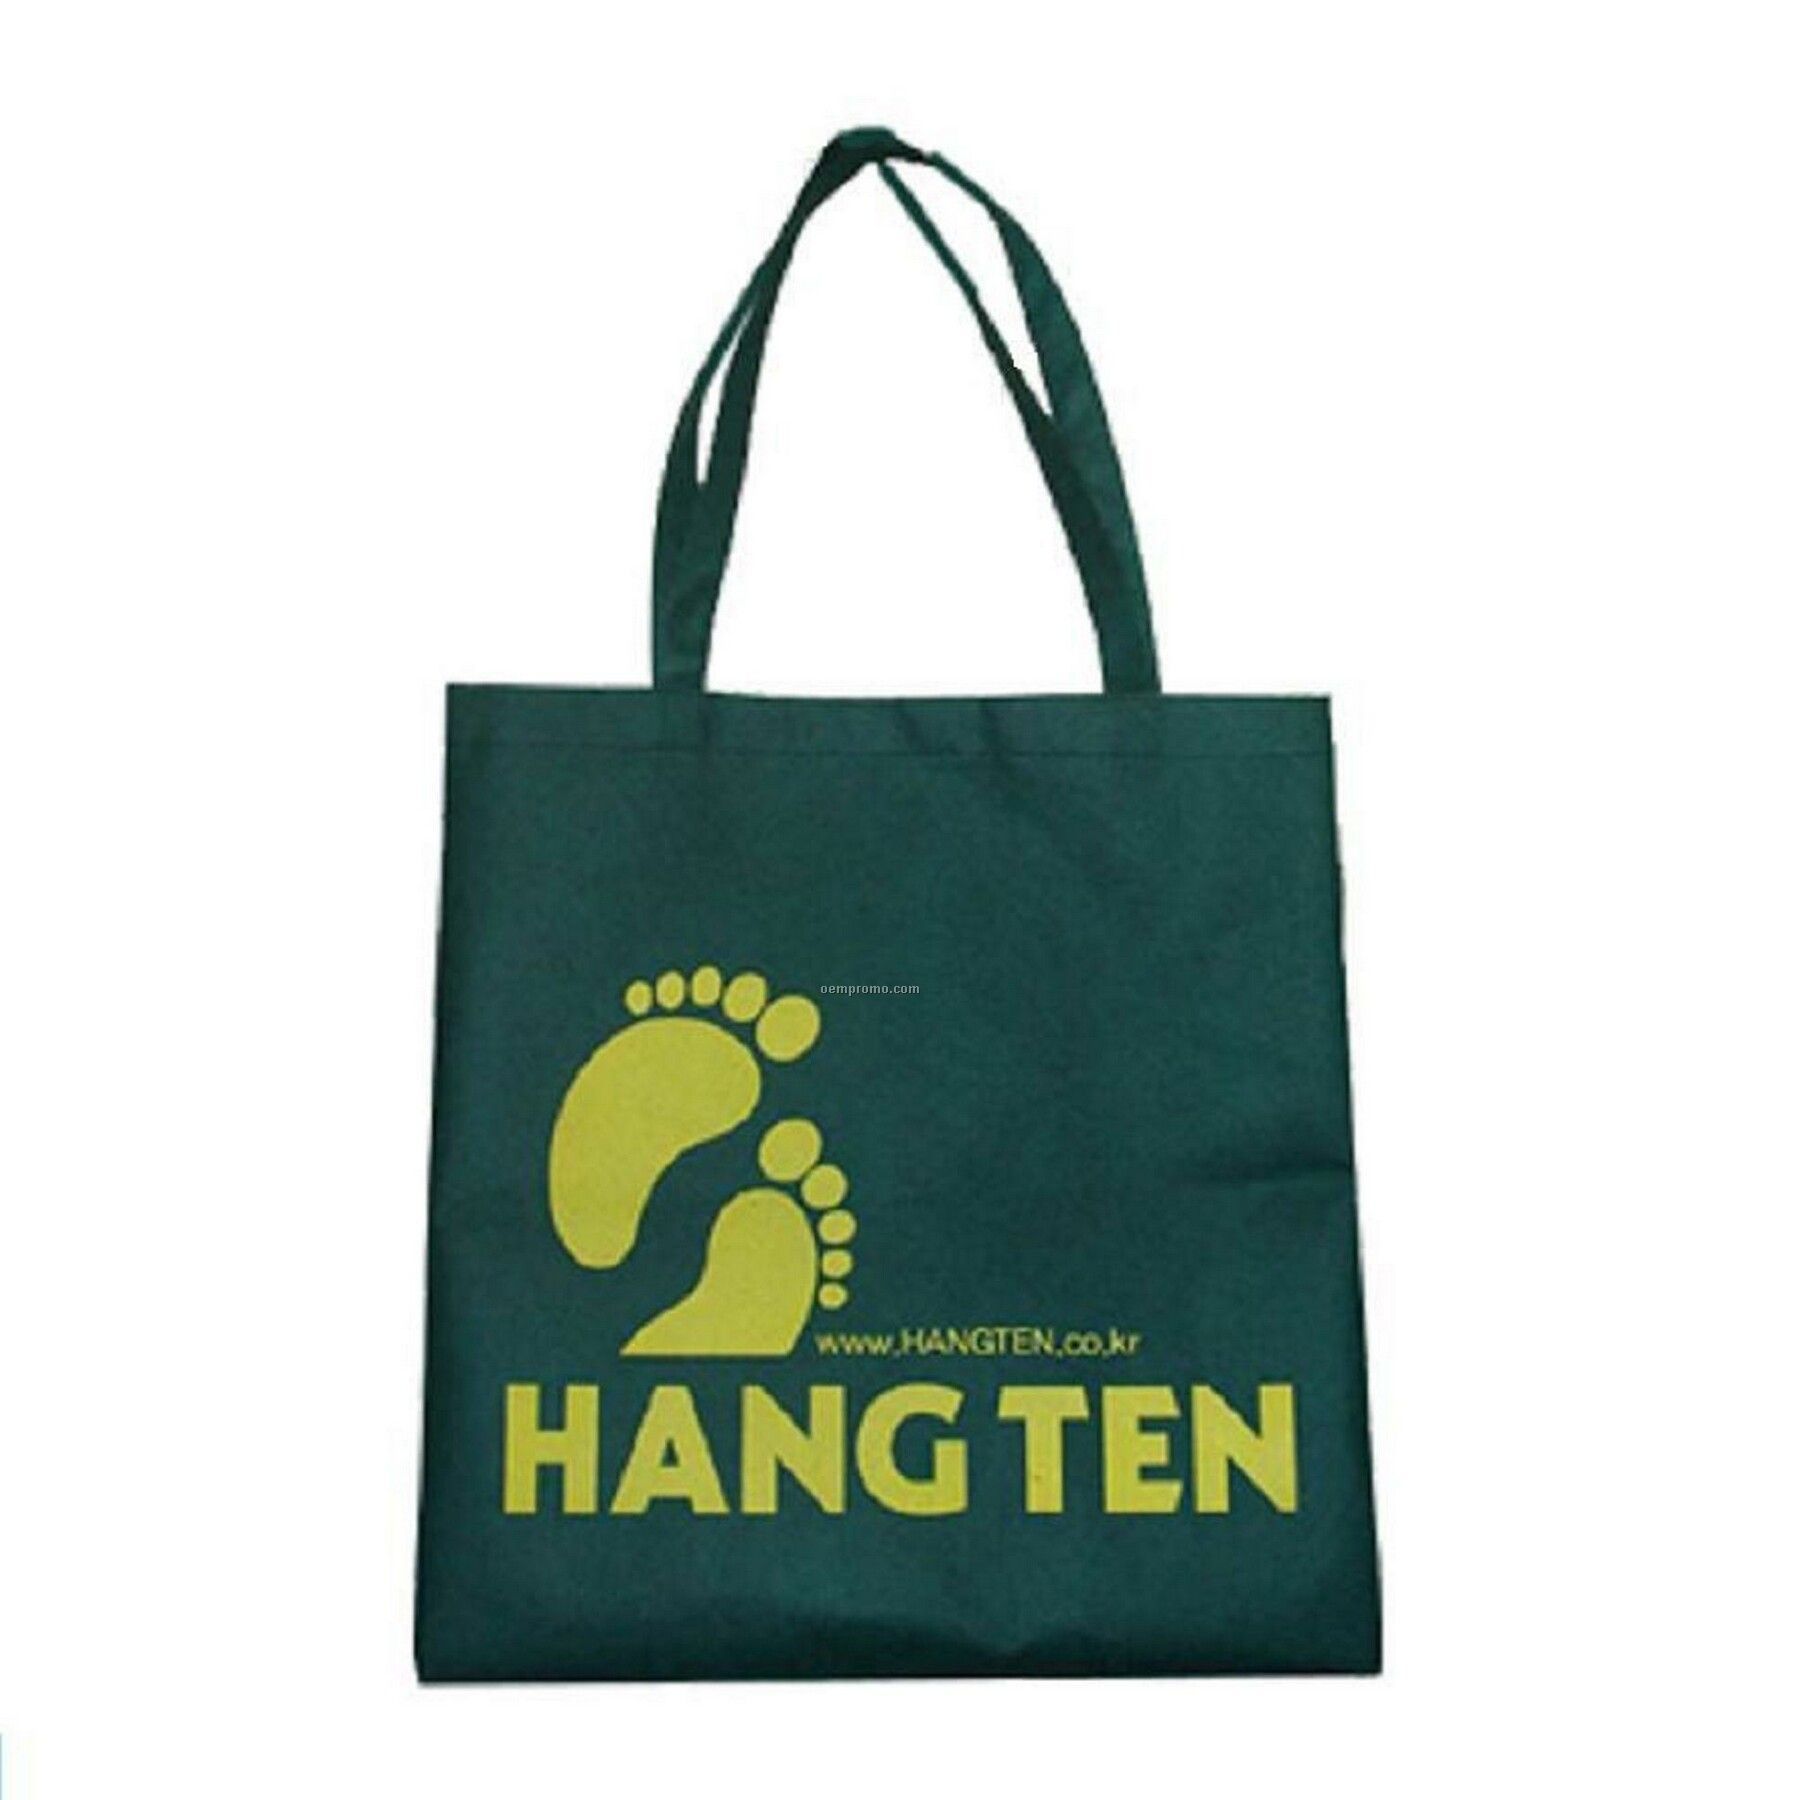 High Quality Non Woven Tote Bag. 80 Gsm Fabric, Measures 12"W X 15"H X 7"D